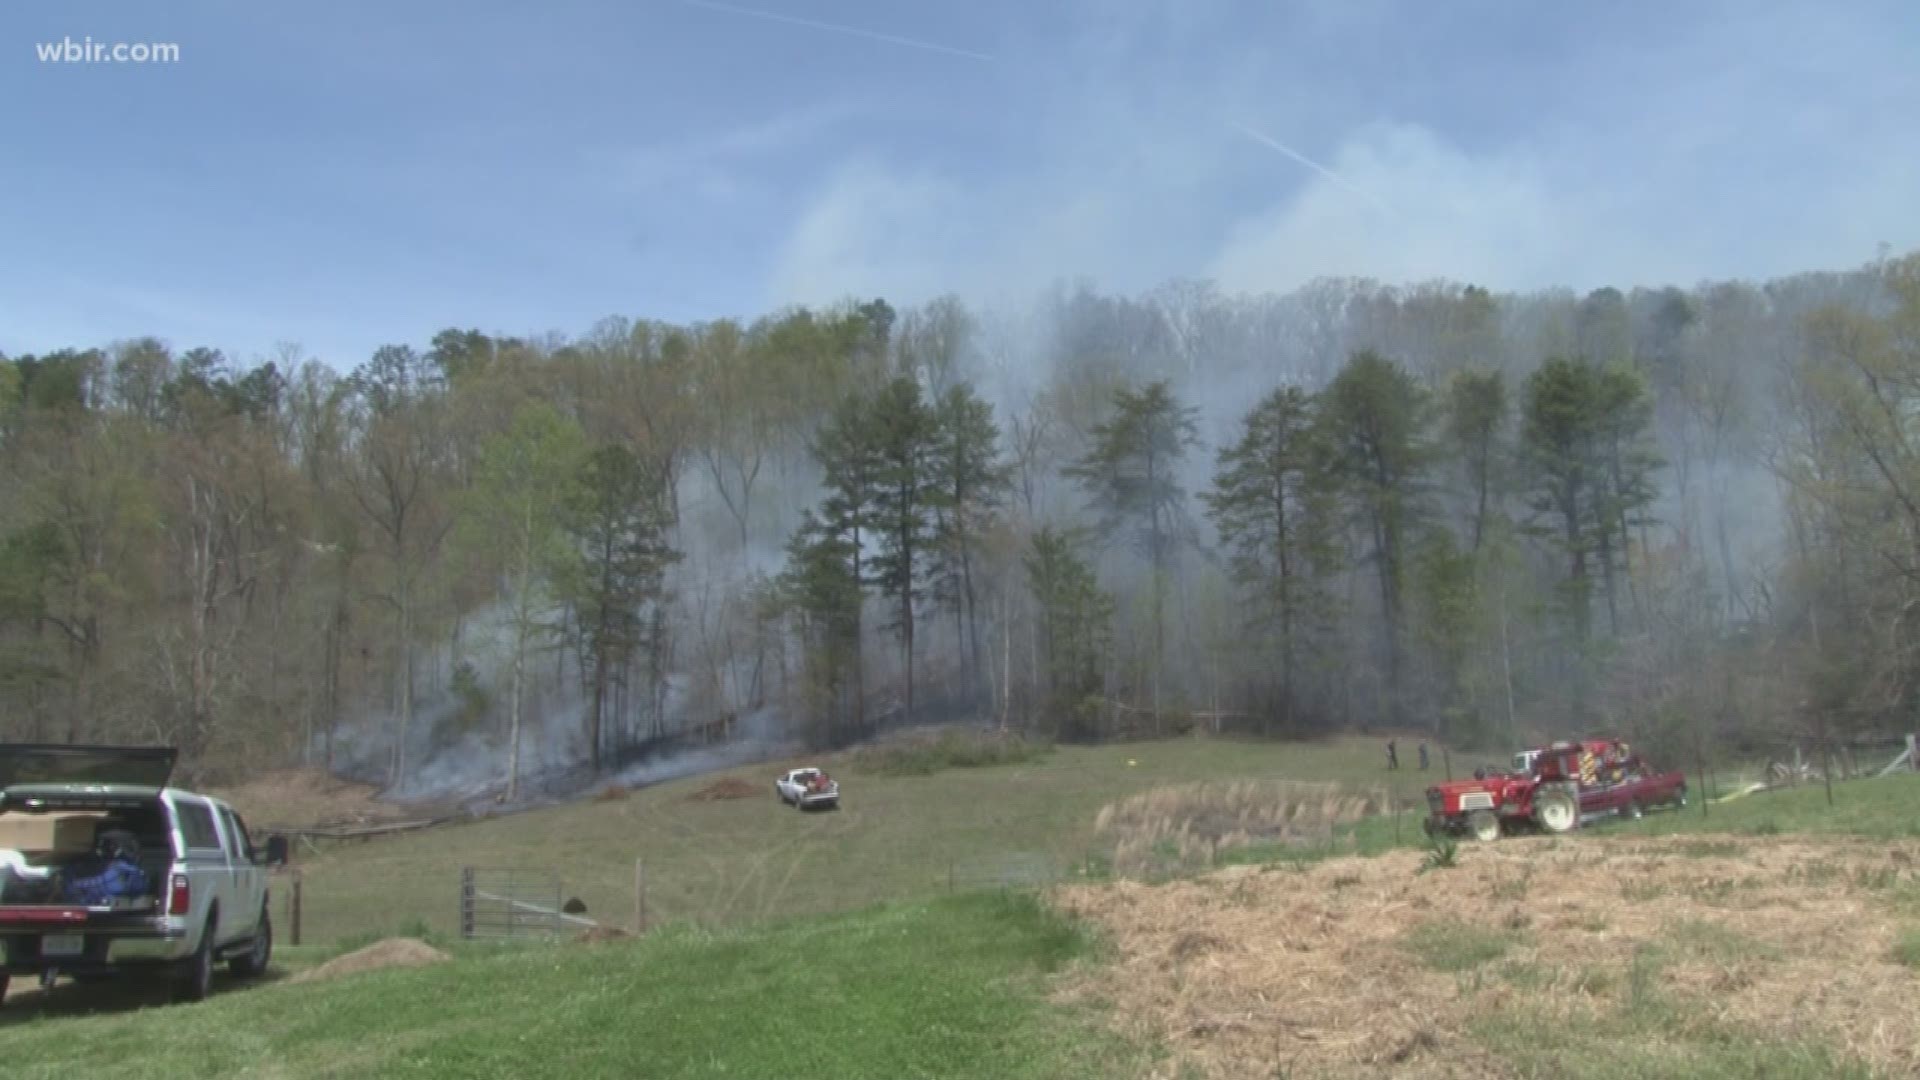 A brush fire in Seymour is completely out after burning 25 acres Saturday.